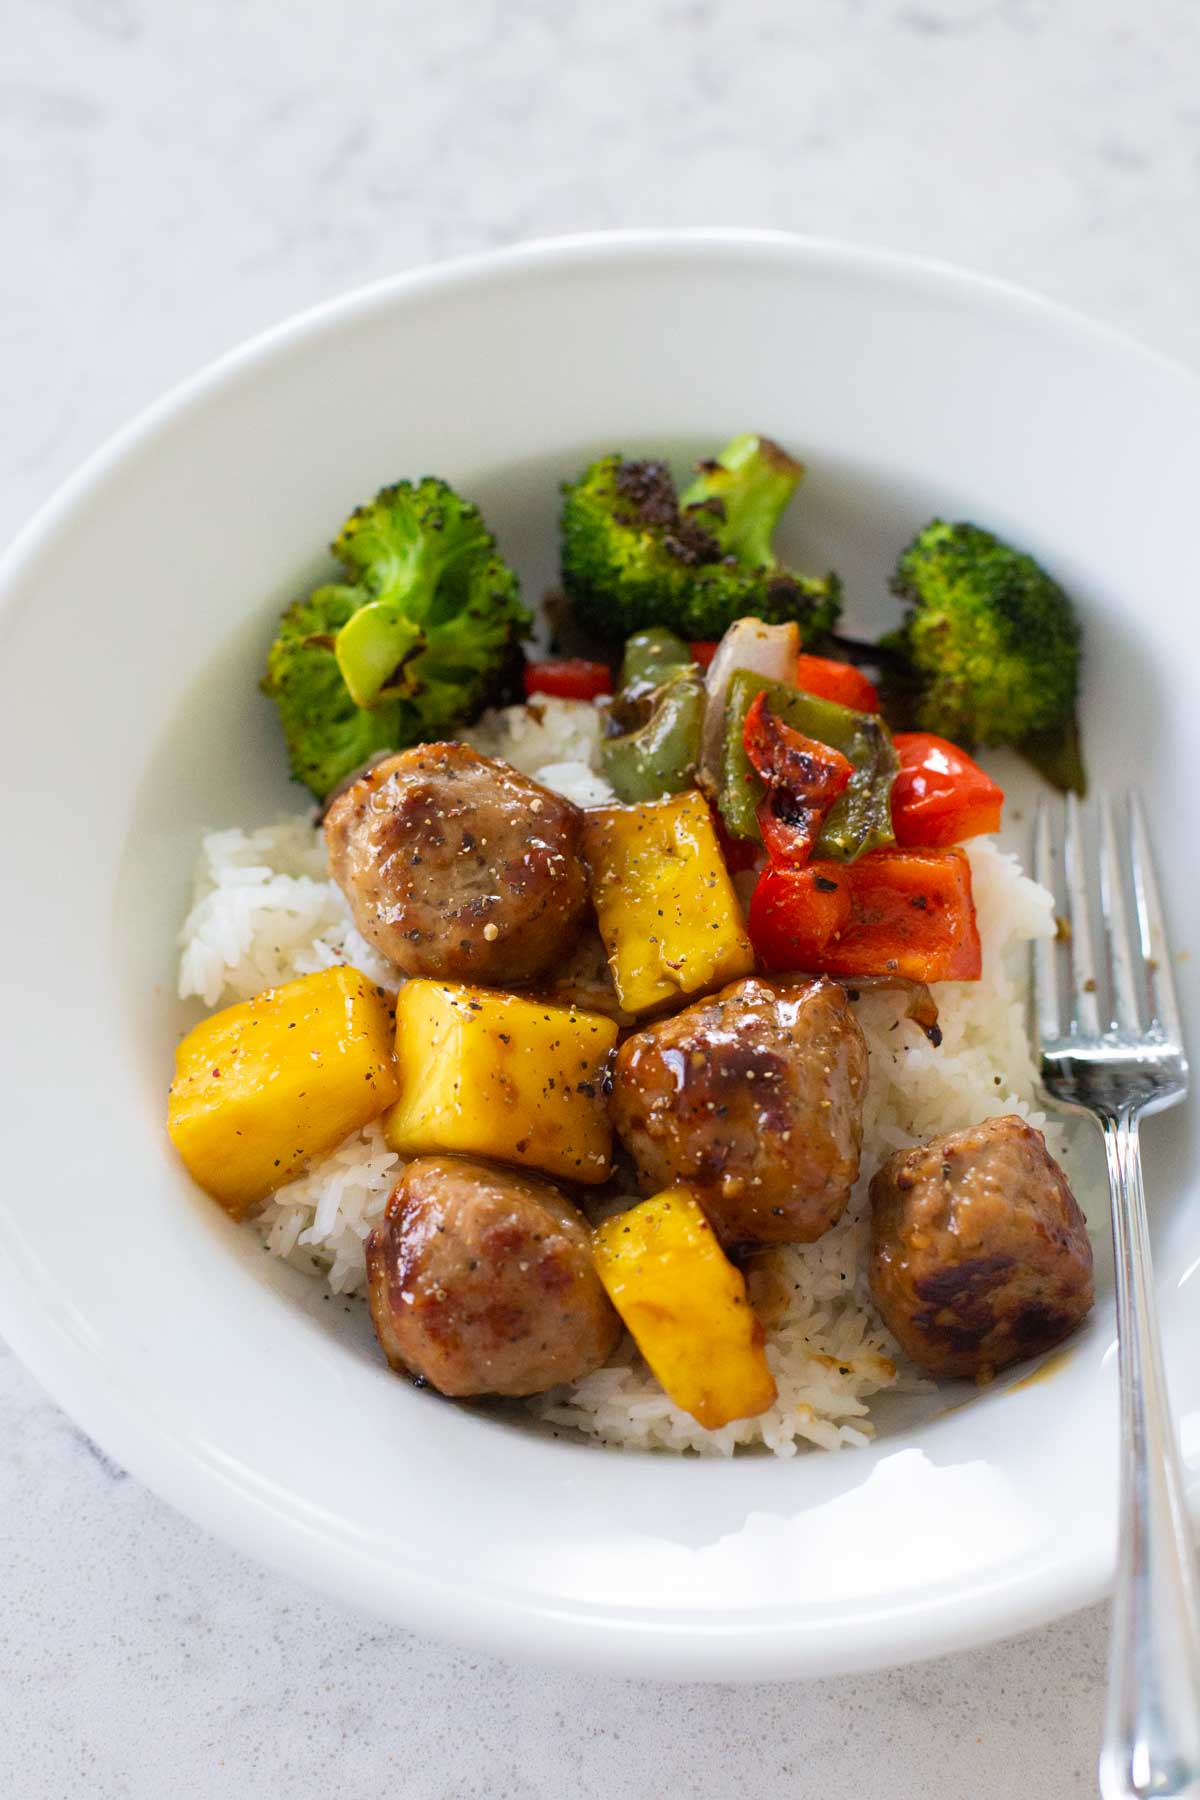 The teriyaki meatballs and pineapple with veggies are spooned over white rice in a bowl.